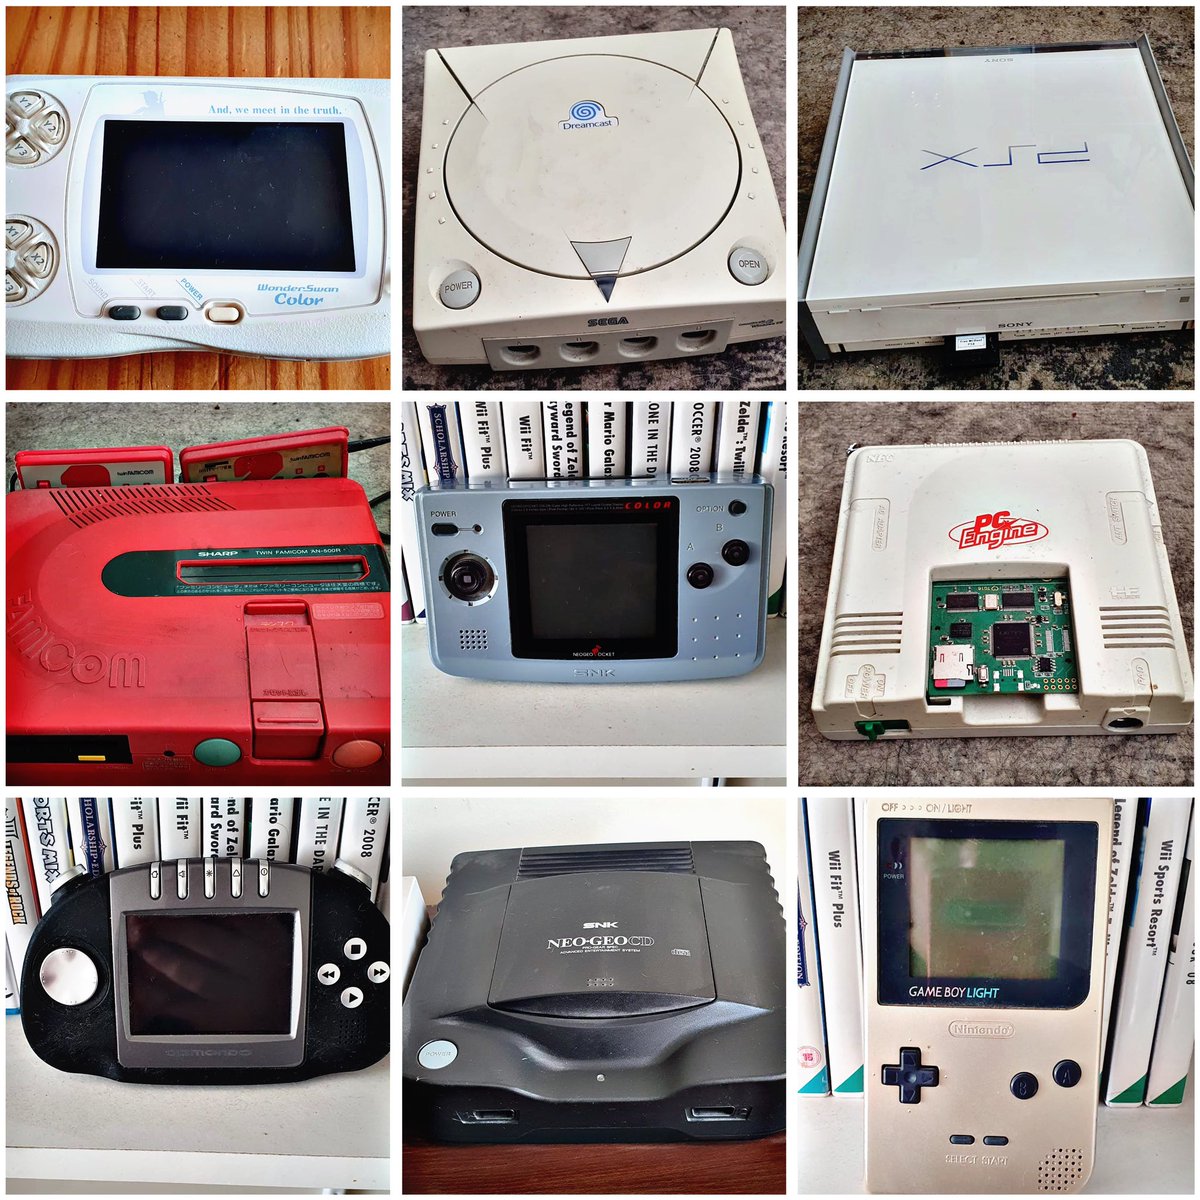 This week’s #RetroEnnead is a guest takeover by @r3trogam3boy, with the #WonderSwan, #Dreamcast, #PSX, #Famicom, #NeoGeo Pocket Color, #PCEngine, #Gizmondo, #NeoGeoCD and #GameBoy Light. Pick a line of 3, dump the rest! #RetroComputing #ComputerHistory #RetroGaming #VideoGames